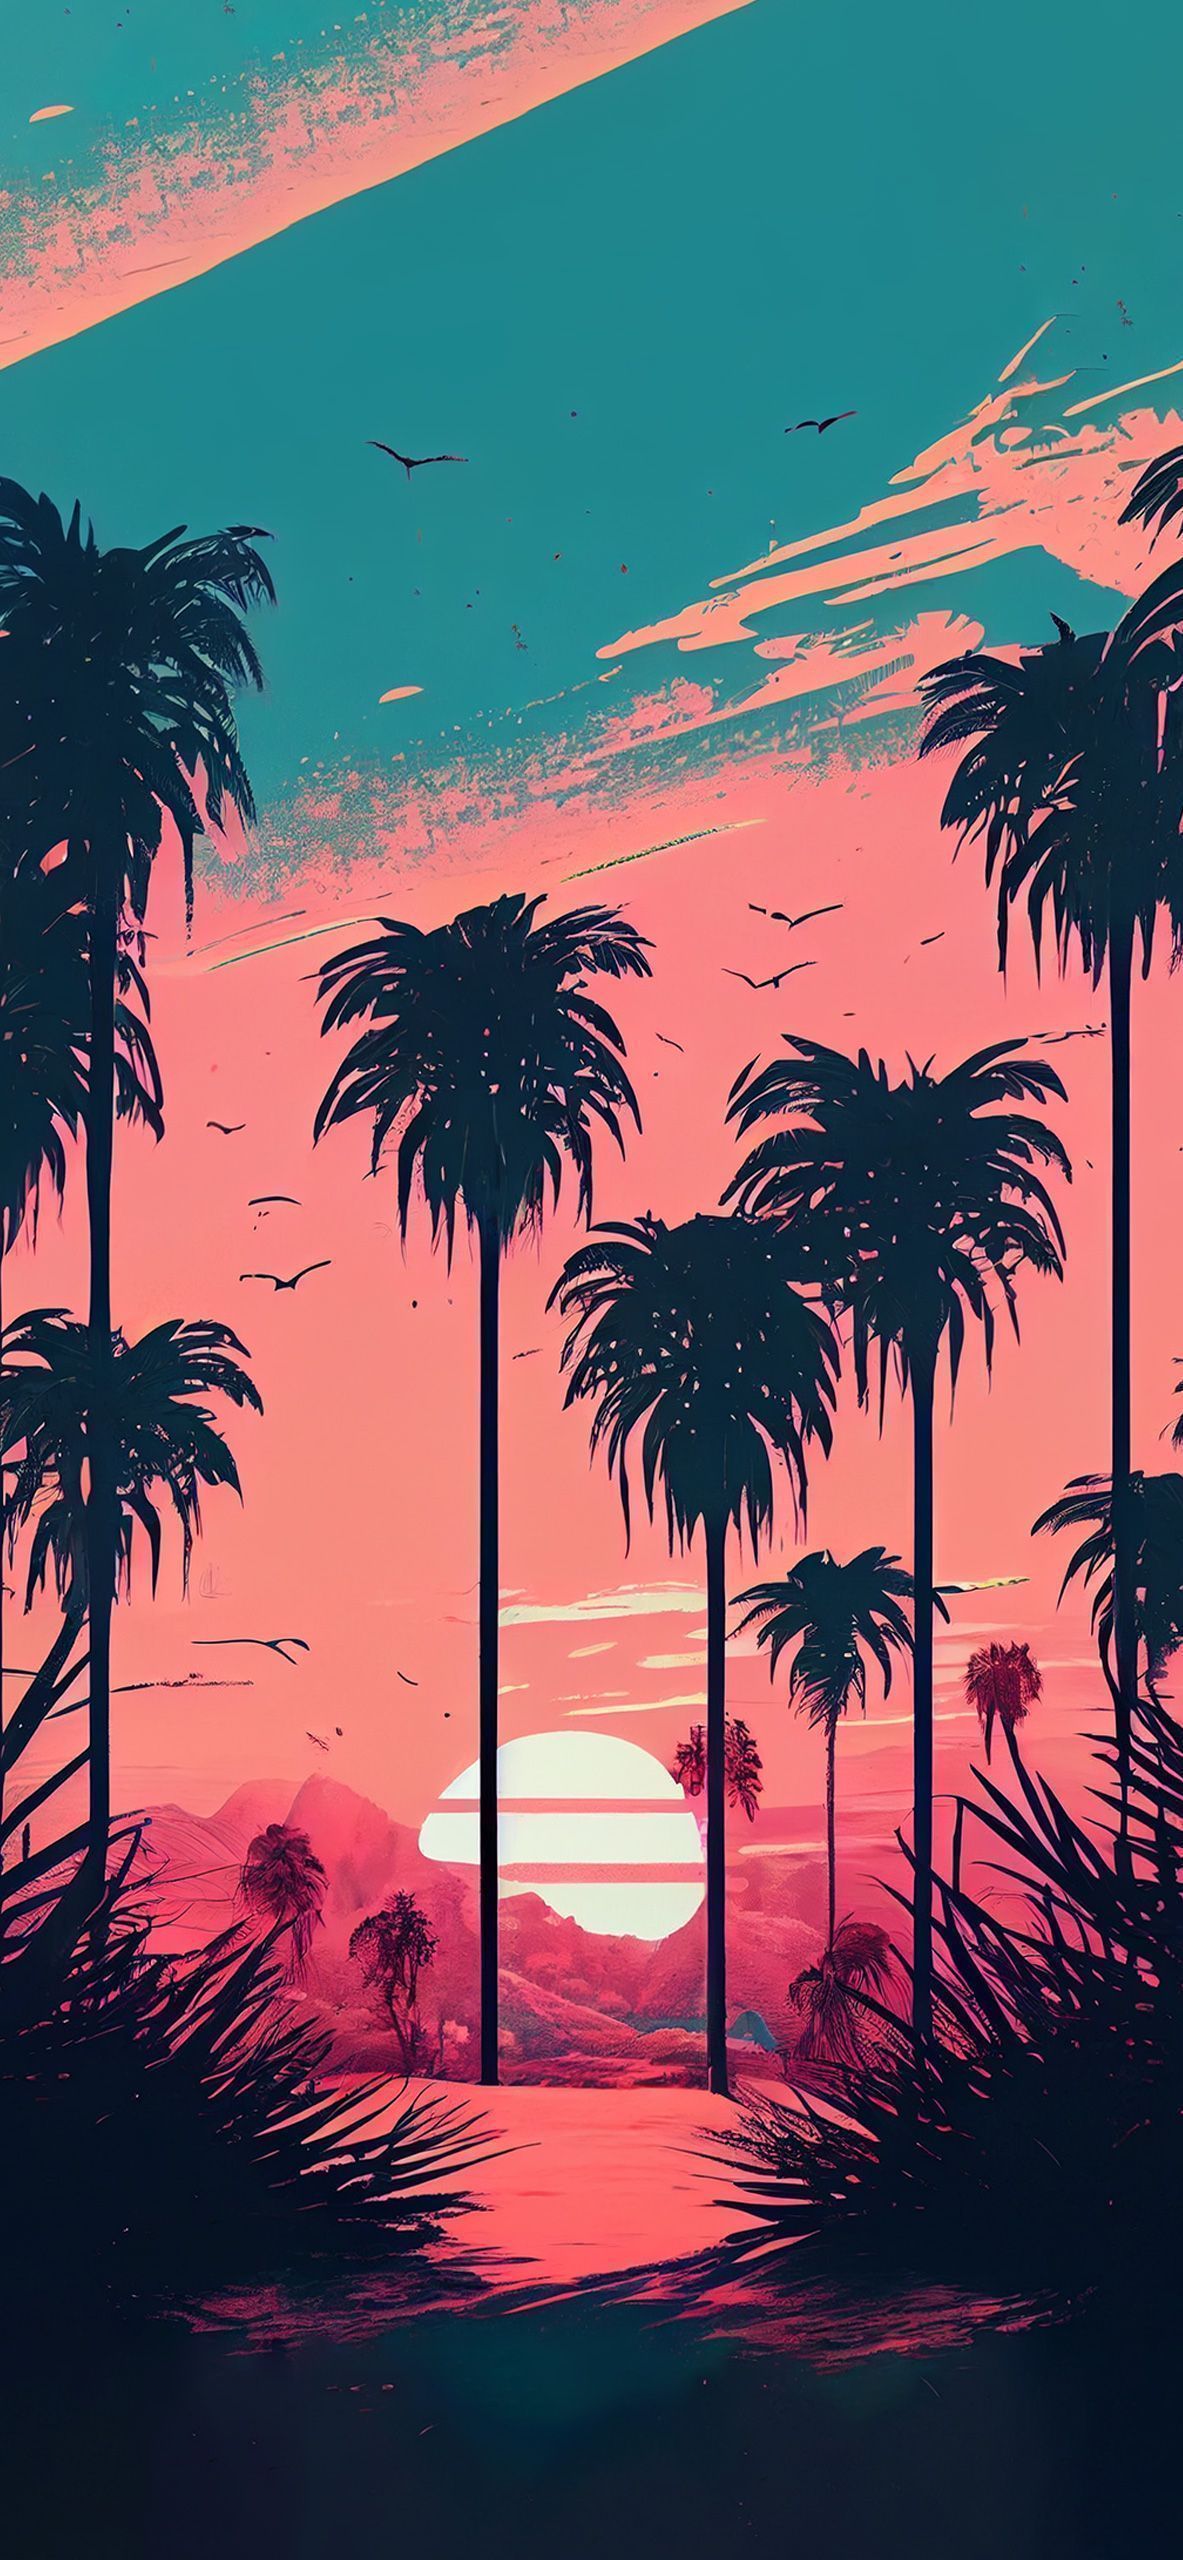 IPhone wallpaper sunset, palm trees, mountains, birds, colorful, pink, blue, green, aesthetic, illustration, iPhone 11, iPhone XS, iPhone XR, iPhone SE, iPhone 8, iPhone 7, iPhone 6, iPhone 6s - Summer